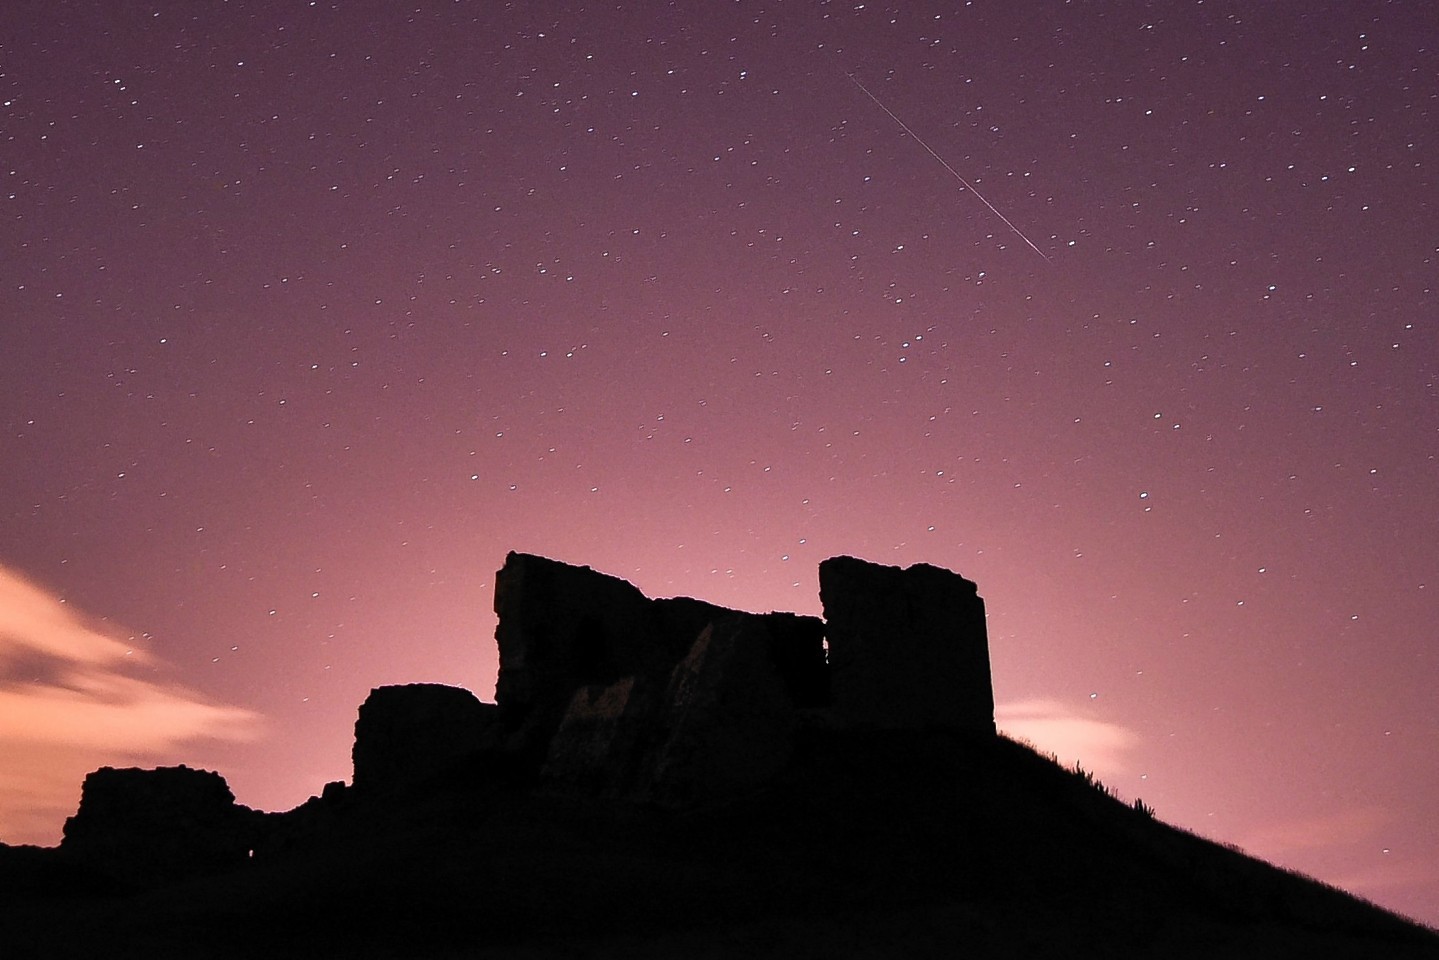 A meteor seen passing over the ruins of Duffus Castle in Moray last year